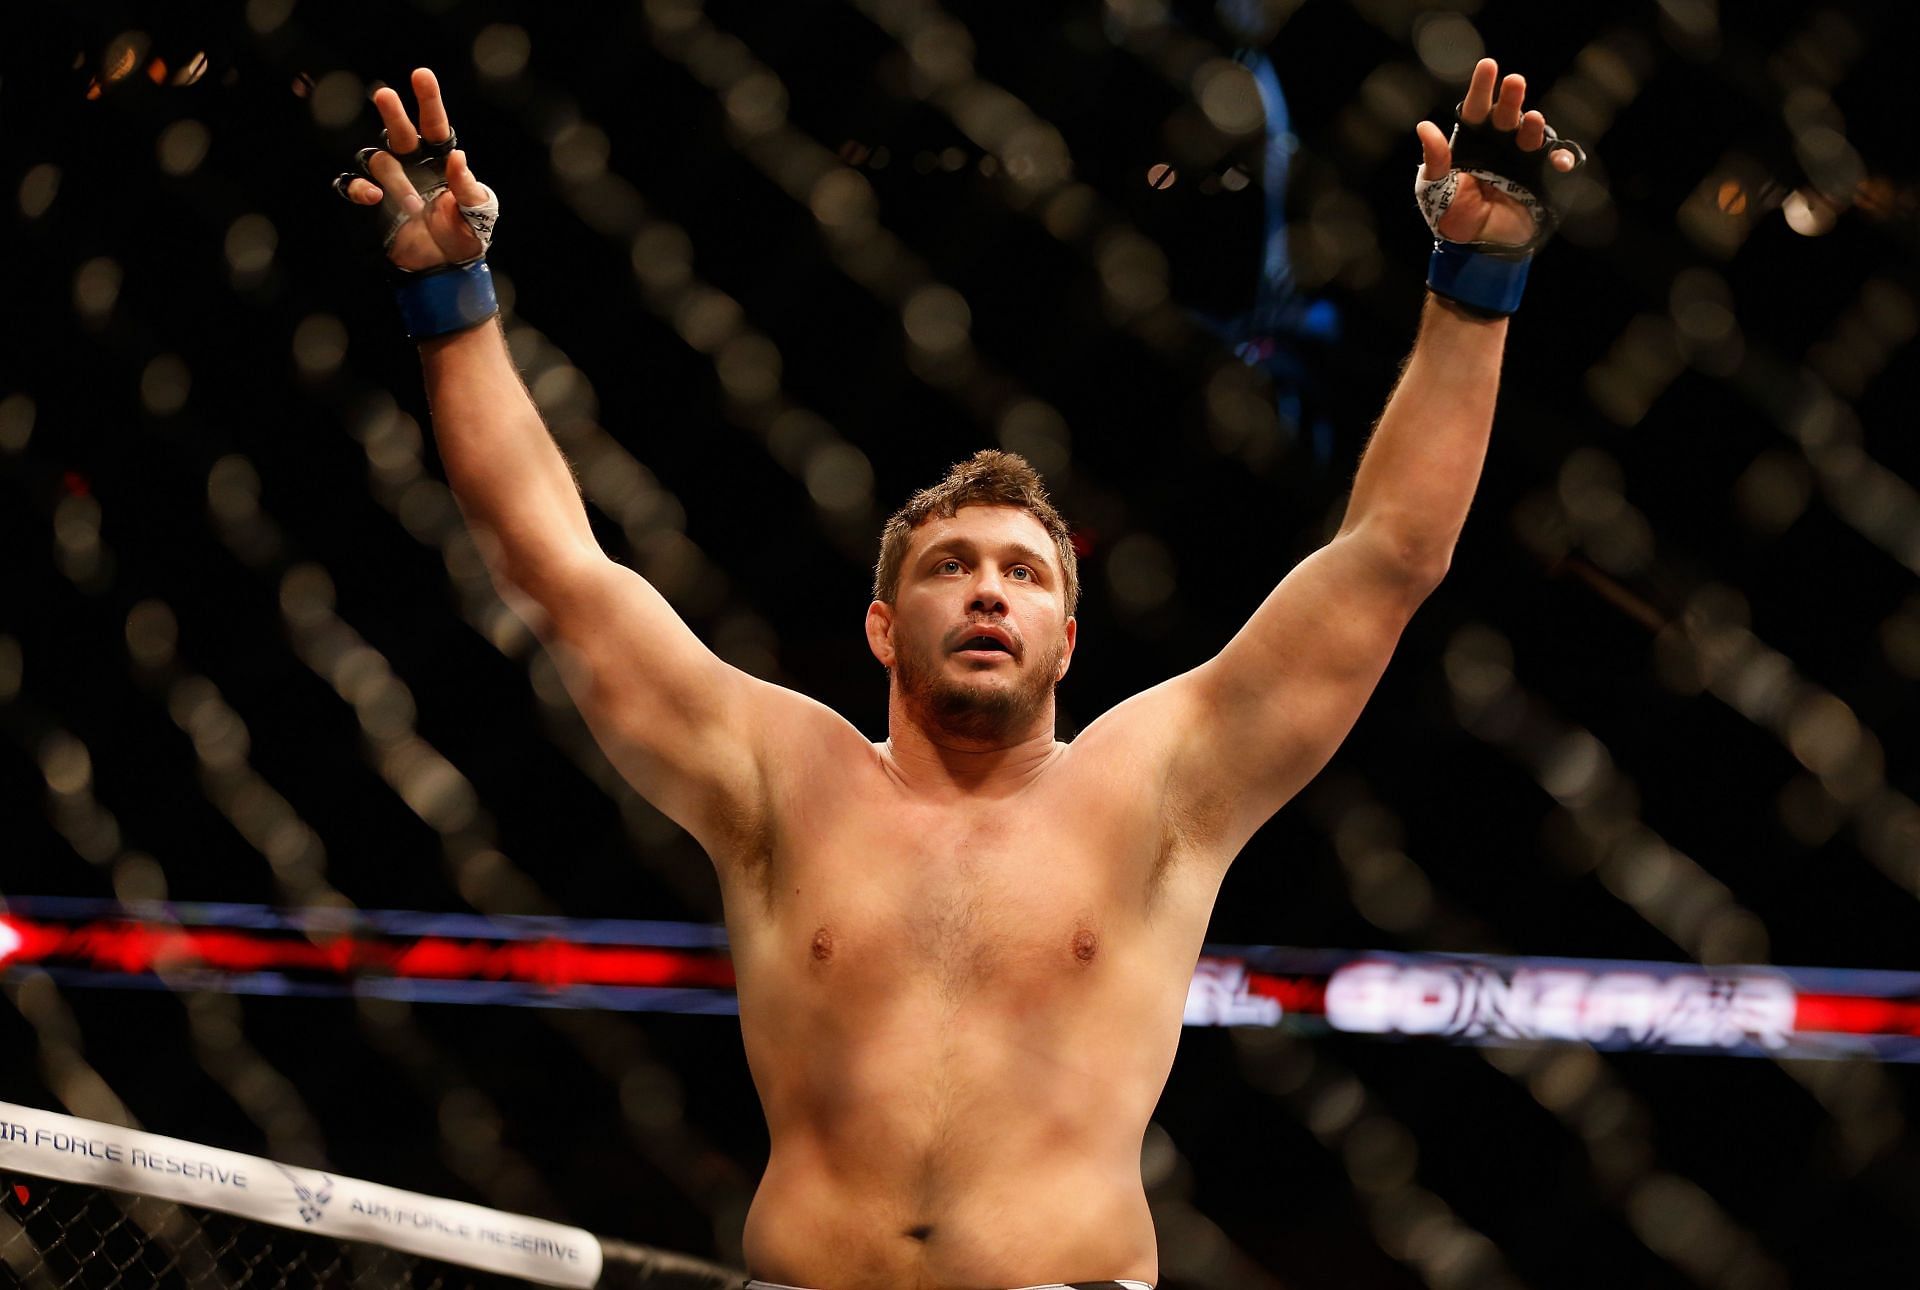 Matt Mitrione was the first man to beat Kimbo Slice in the UFC octagon